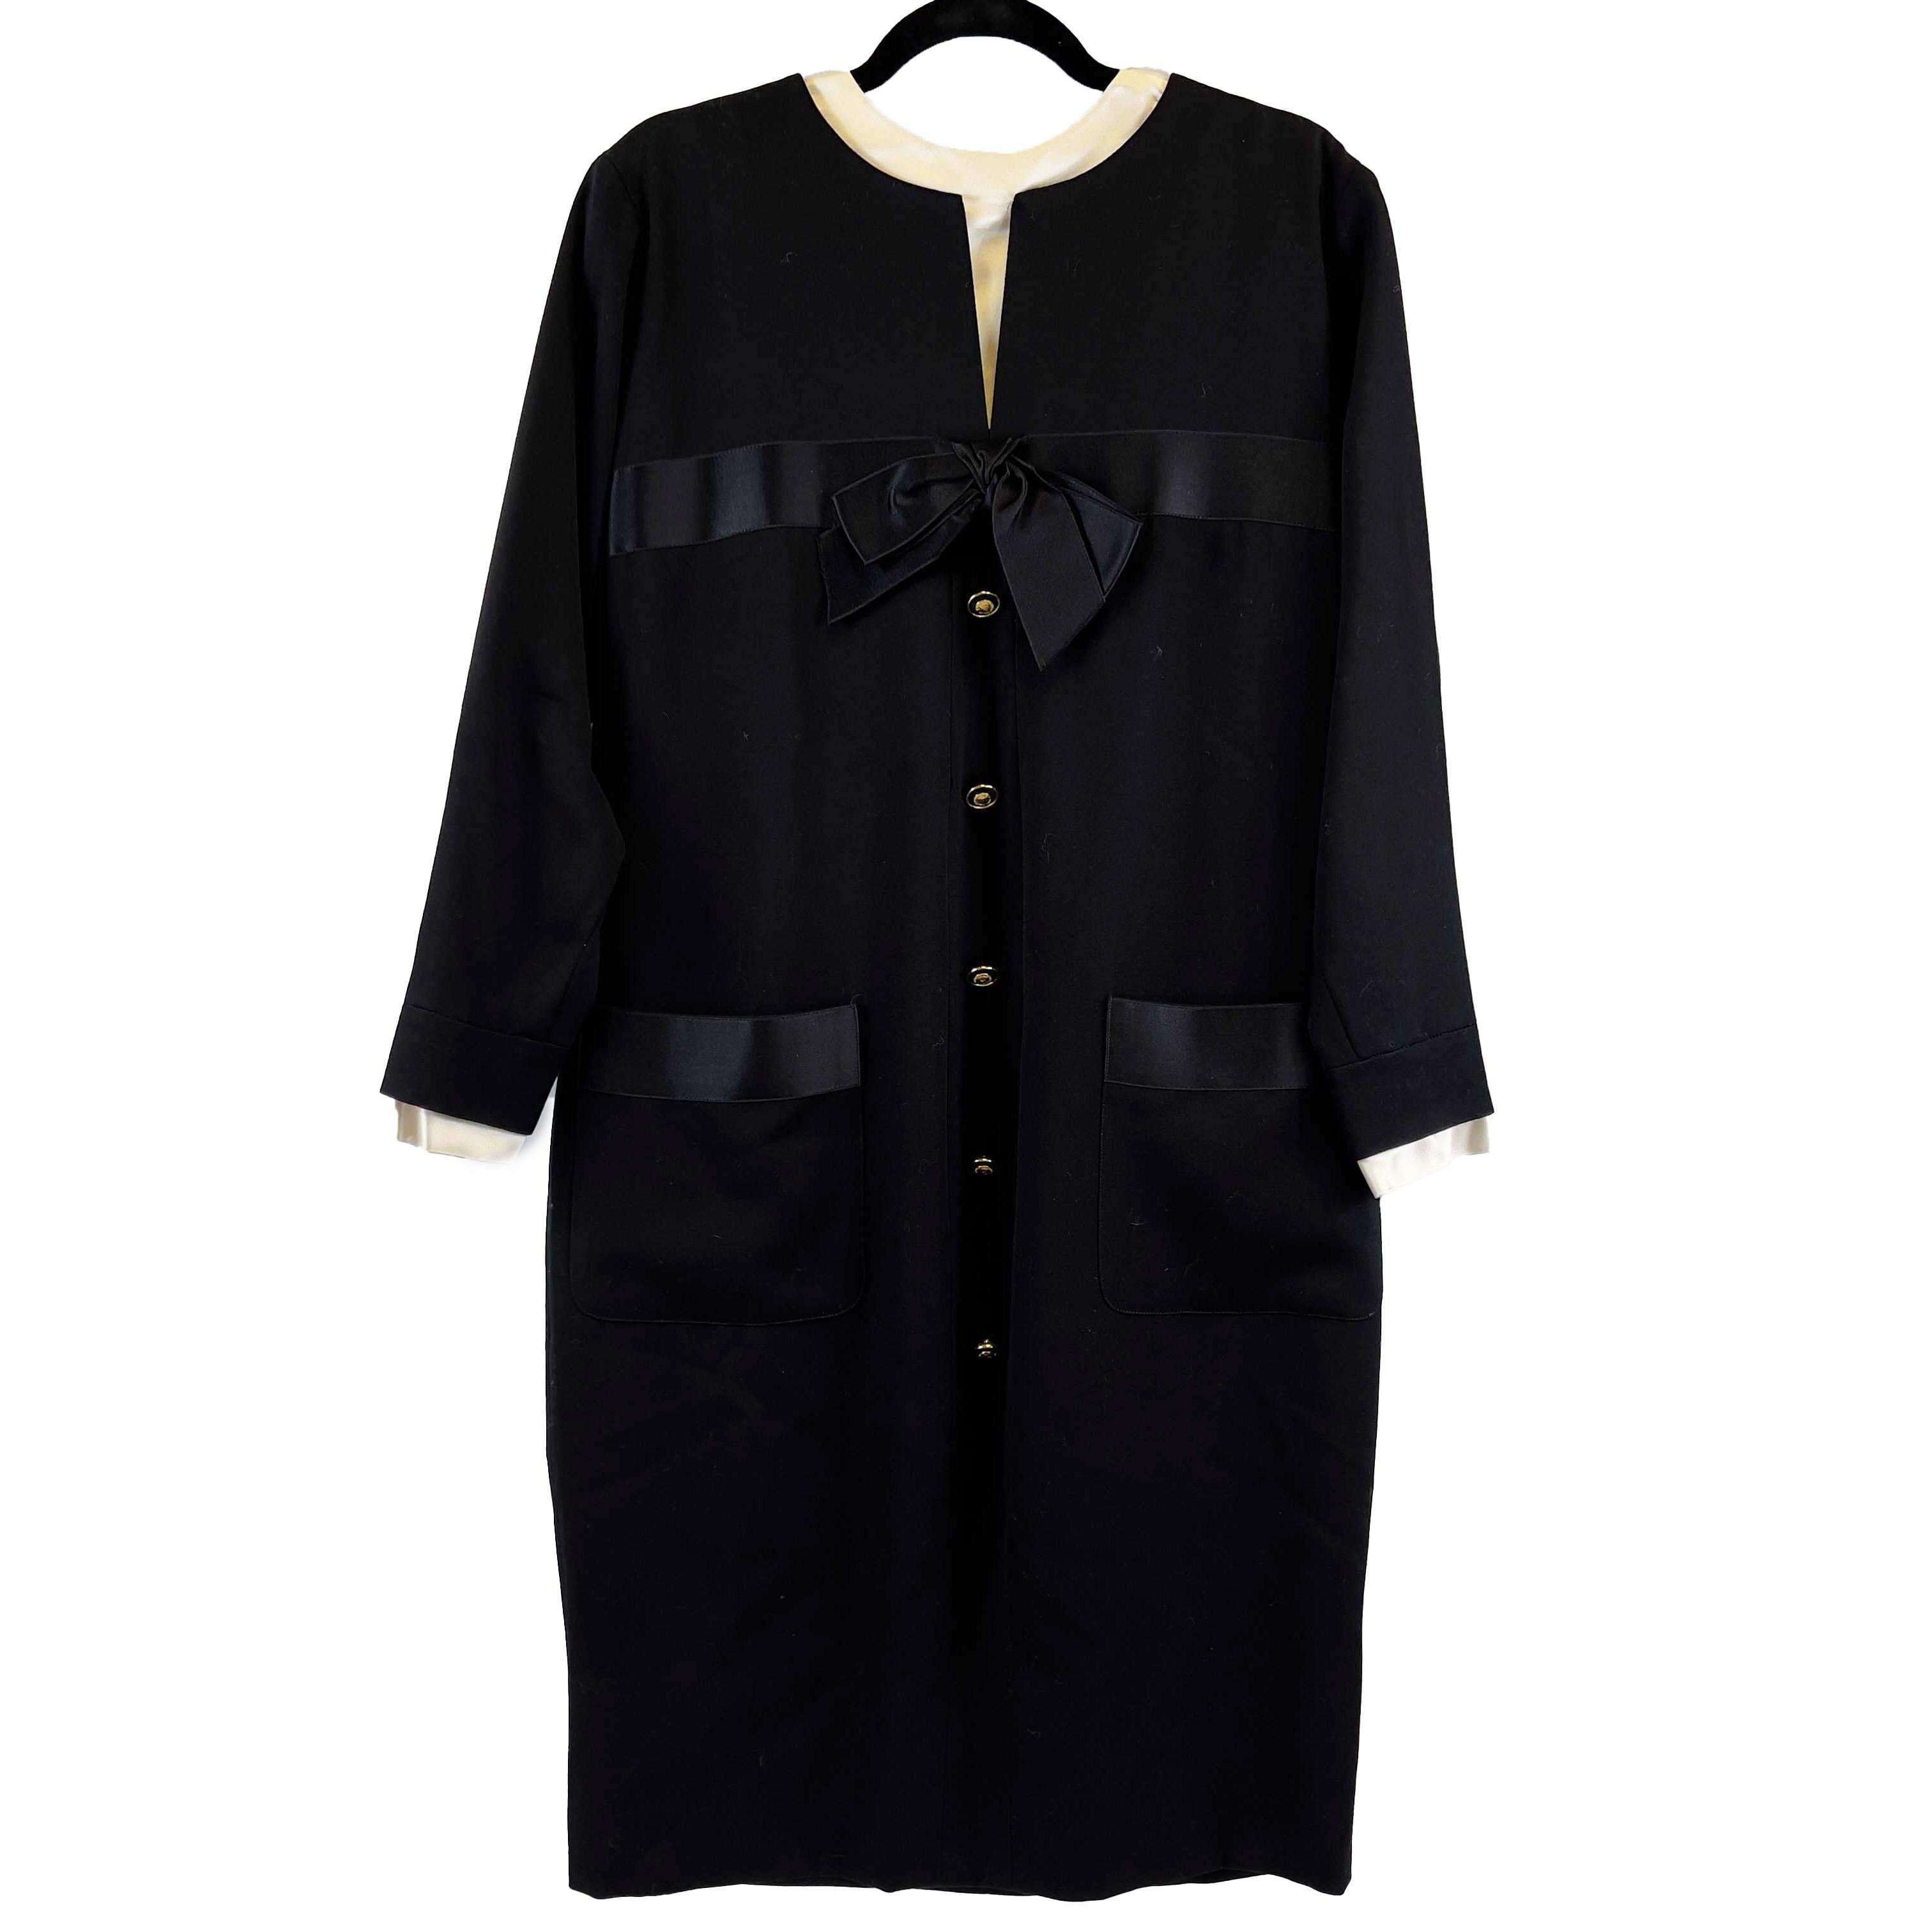 CHANEL Vintage Satin Layer Trim Bow Shift Wool Dress Black FR 40 / US 8 In Good Condition For Sale In Sanford, FL